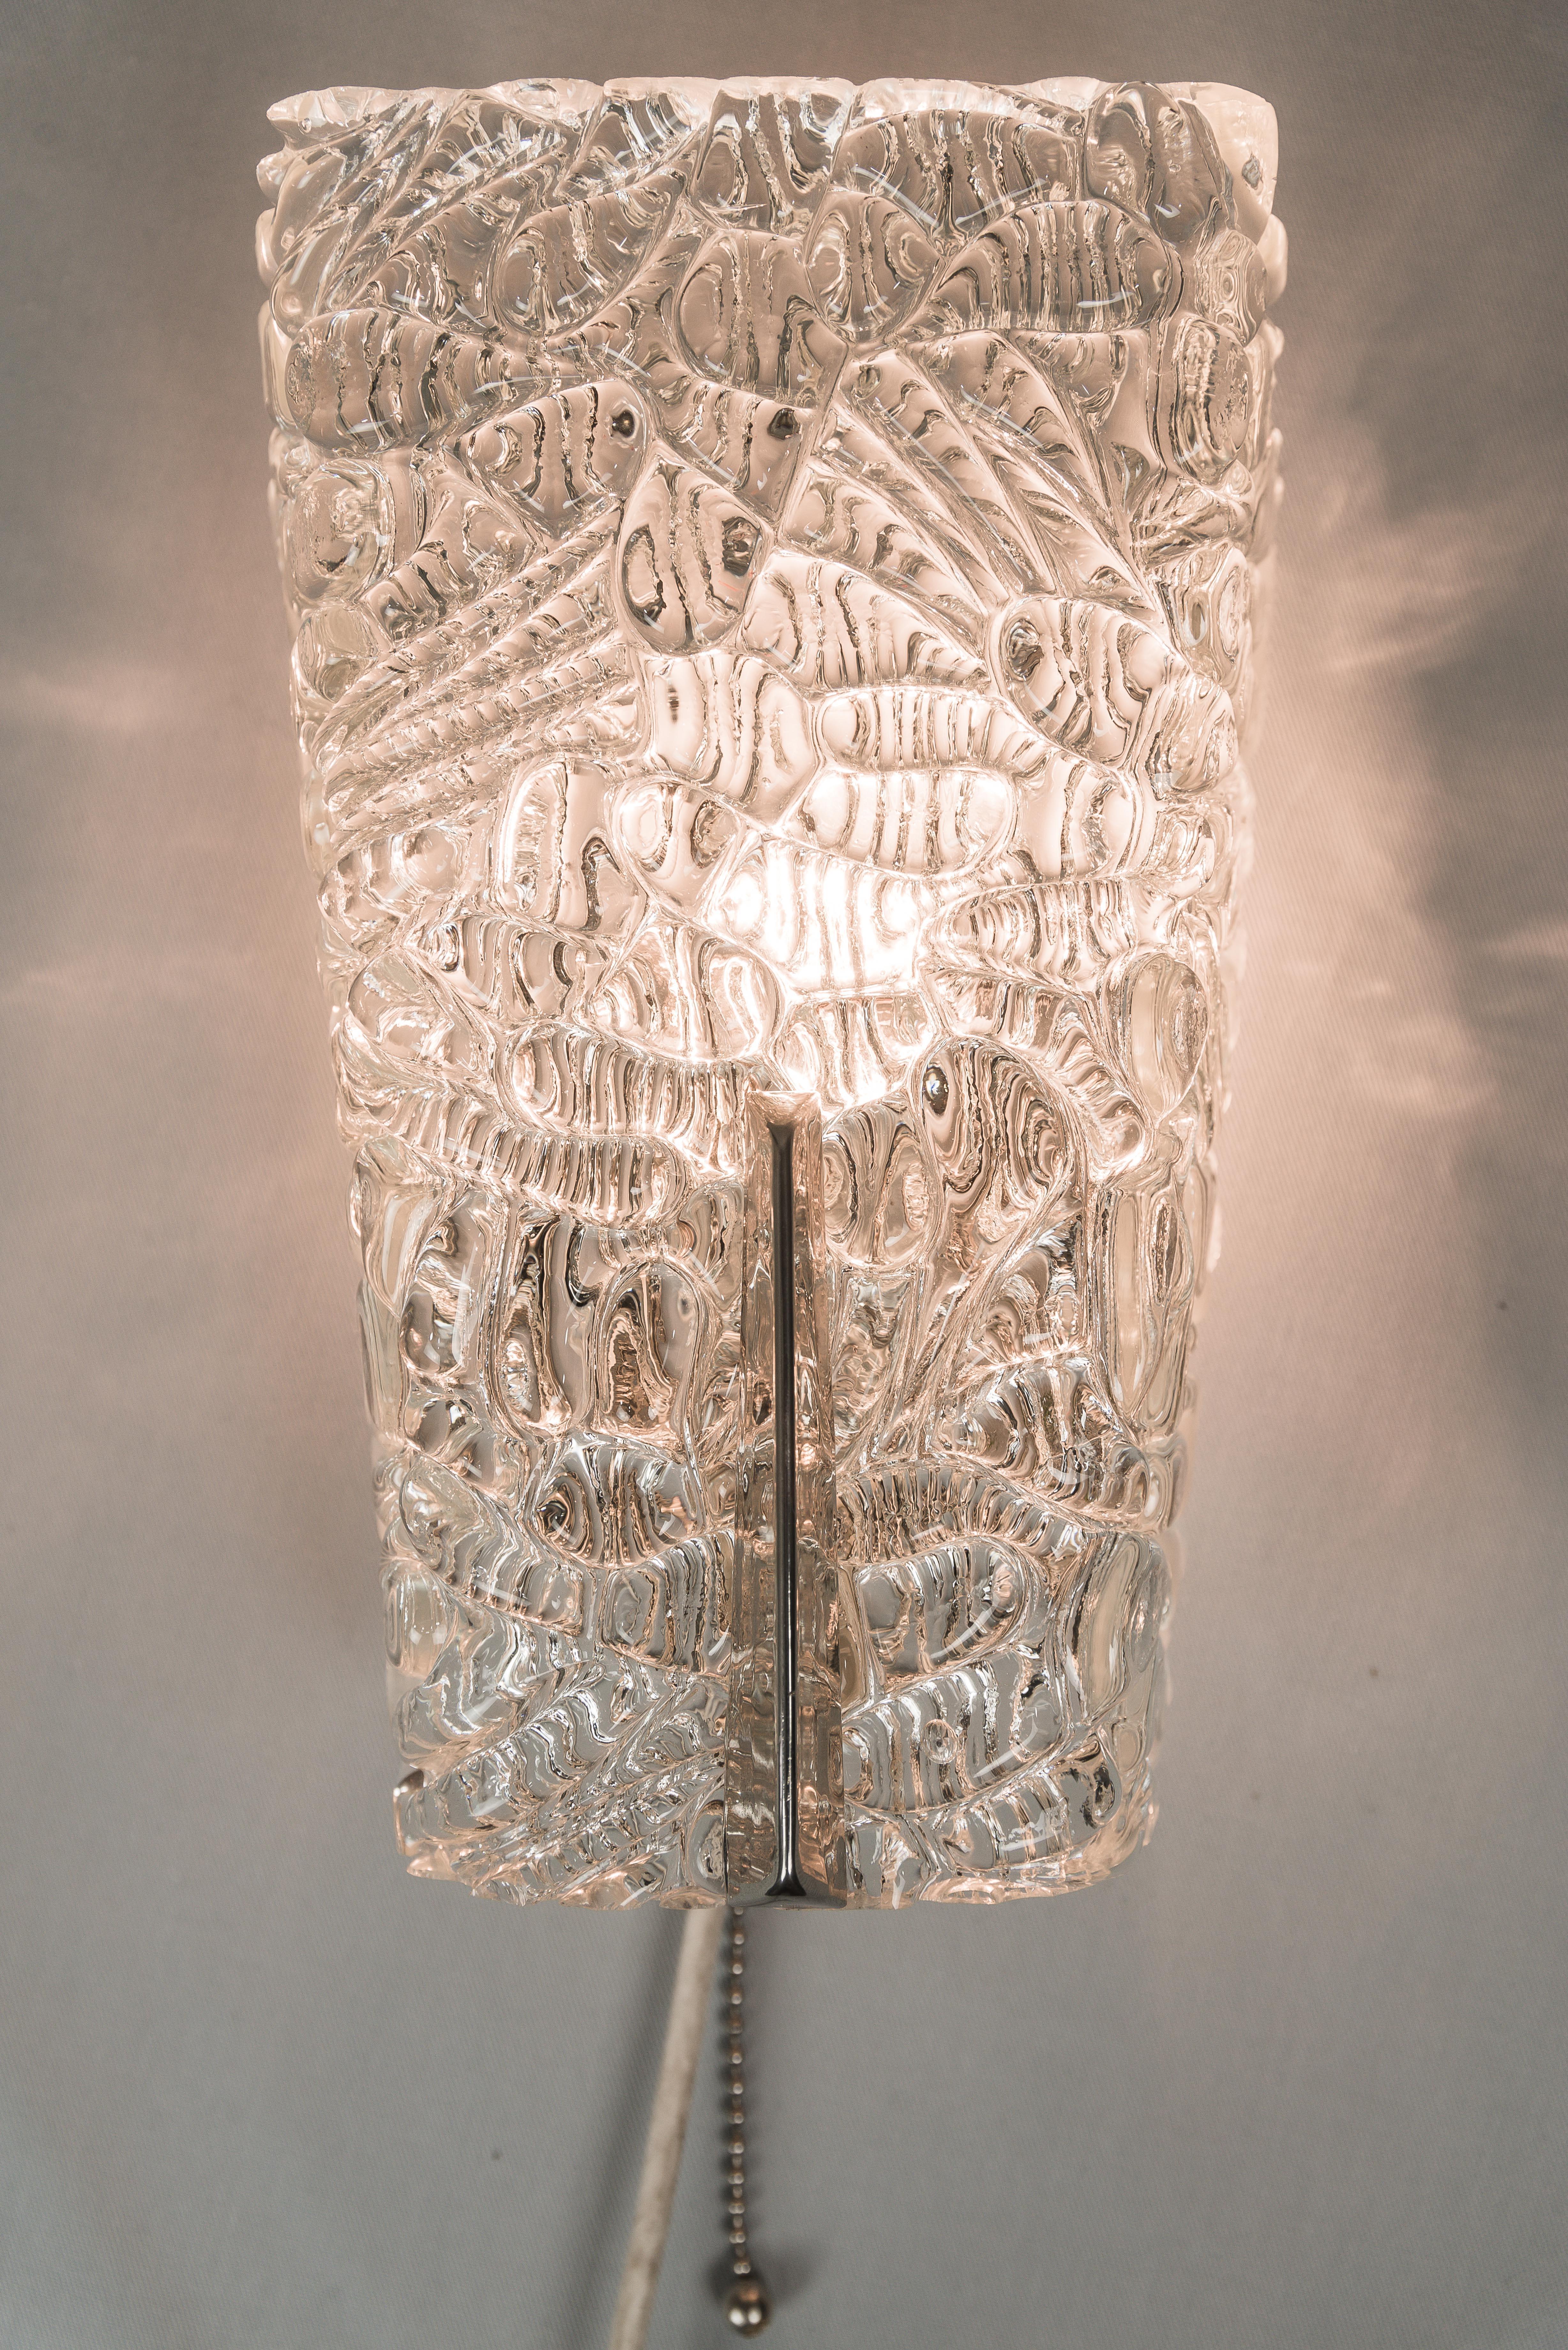 Austrian Two J.T Kalmar Sconces with Textured Glass and Nickel Parts, circa 1950s For Sale